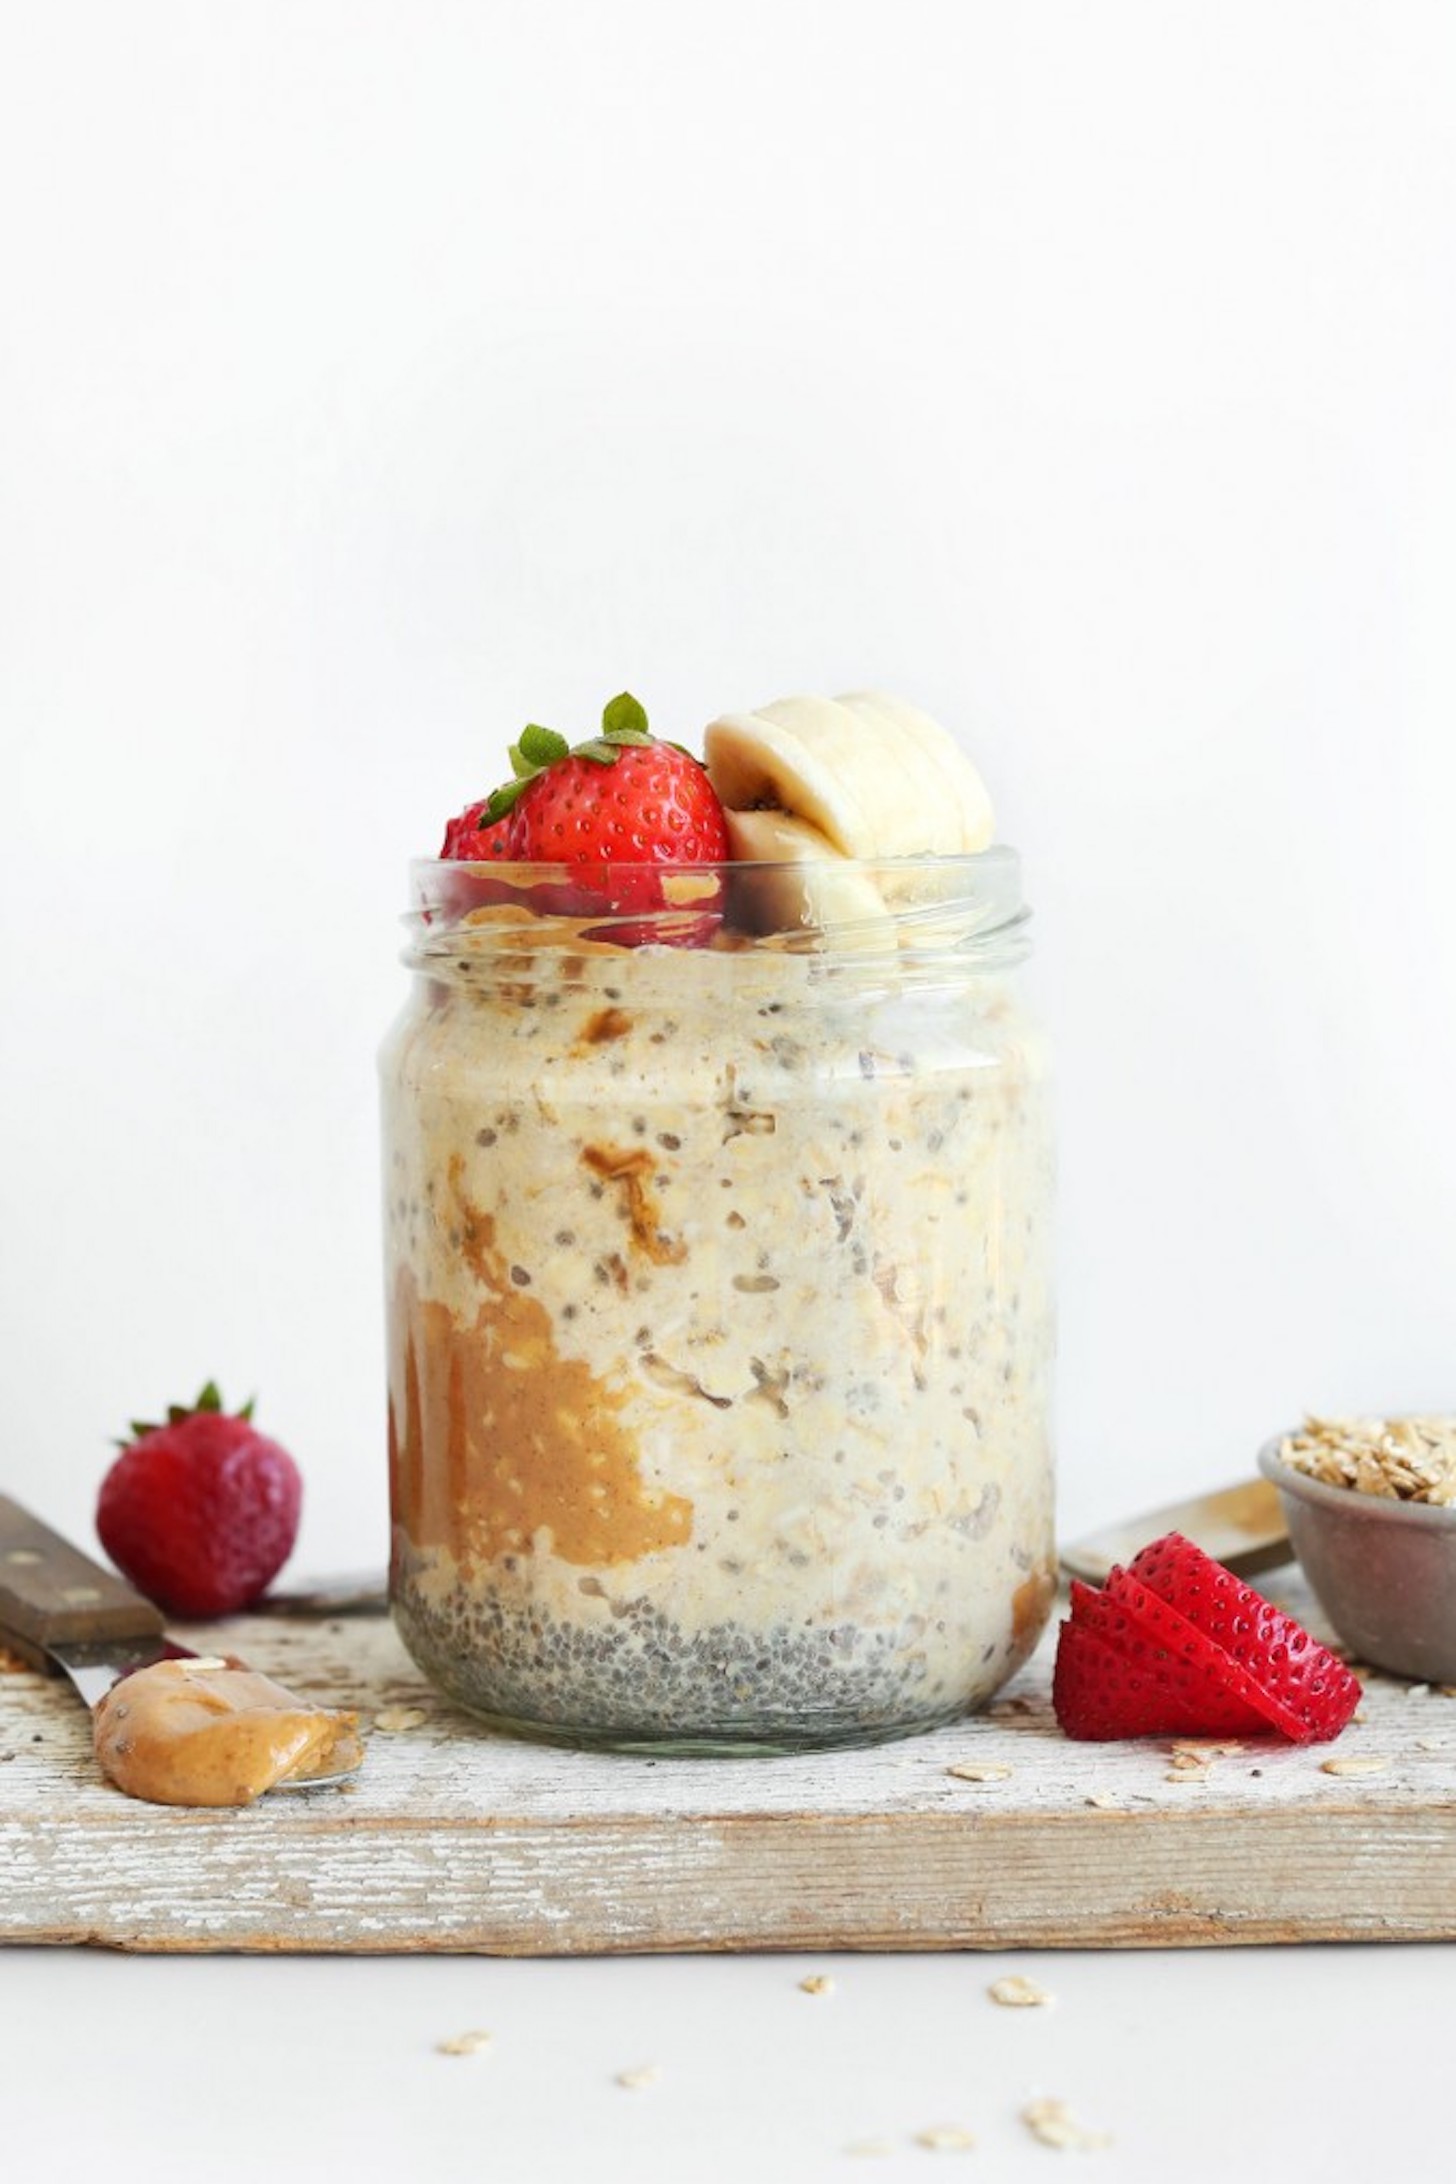 https://minimalistbaker.com/wp-content/uploads/2015/08/THE-BEST-AMAZING-Peanut-Butter-Overnight-Oats-Just-5-ingredients-5-minutes-prep-and-SO-delicious-vegan-recipe-glutenfree-meal-breakfast-oats-oatmeal-678x1024-1.jpg Recipe